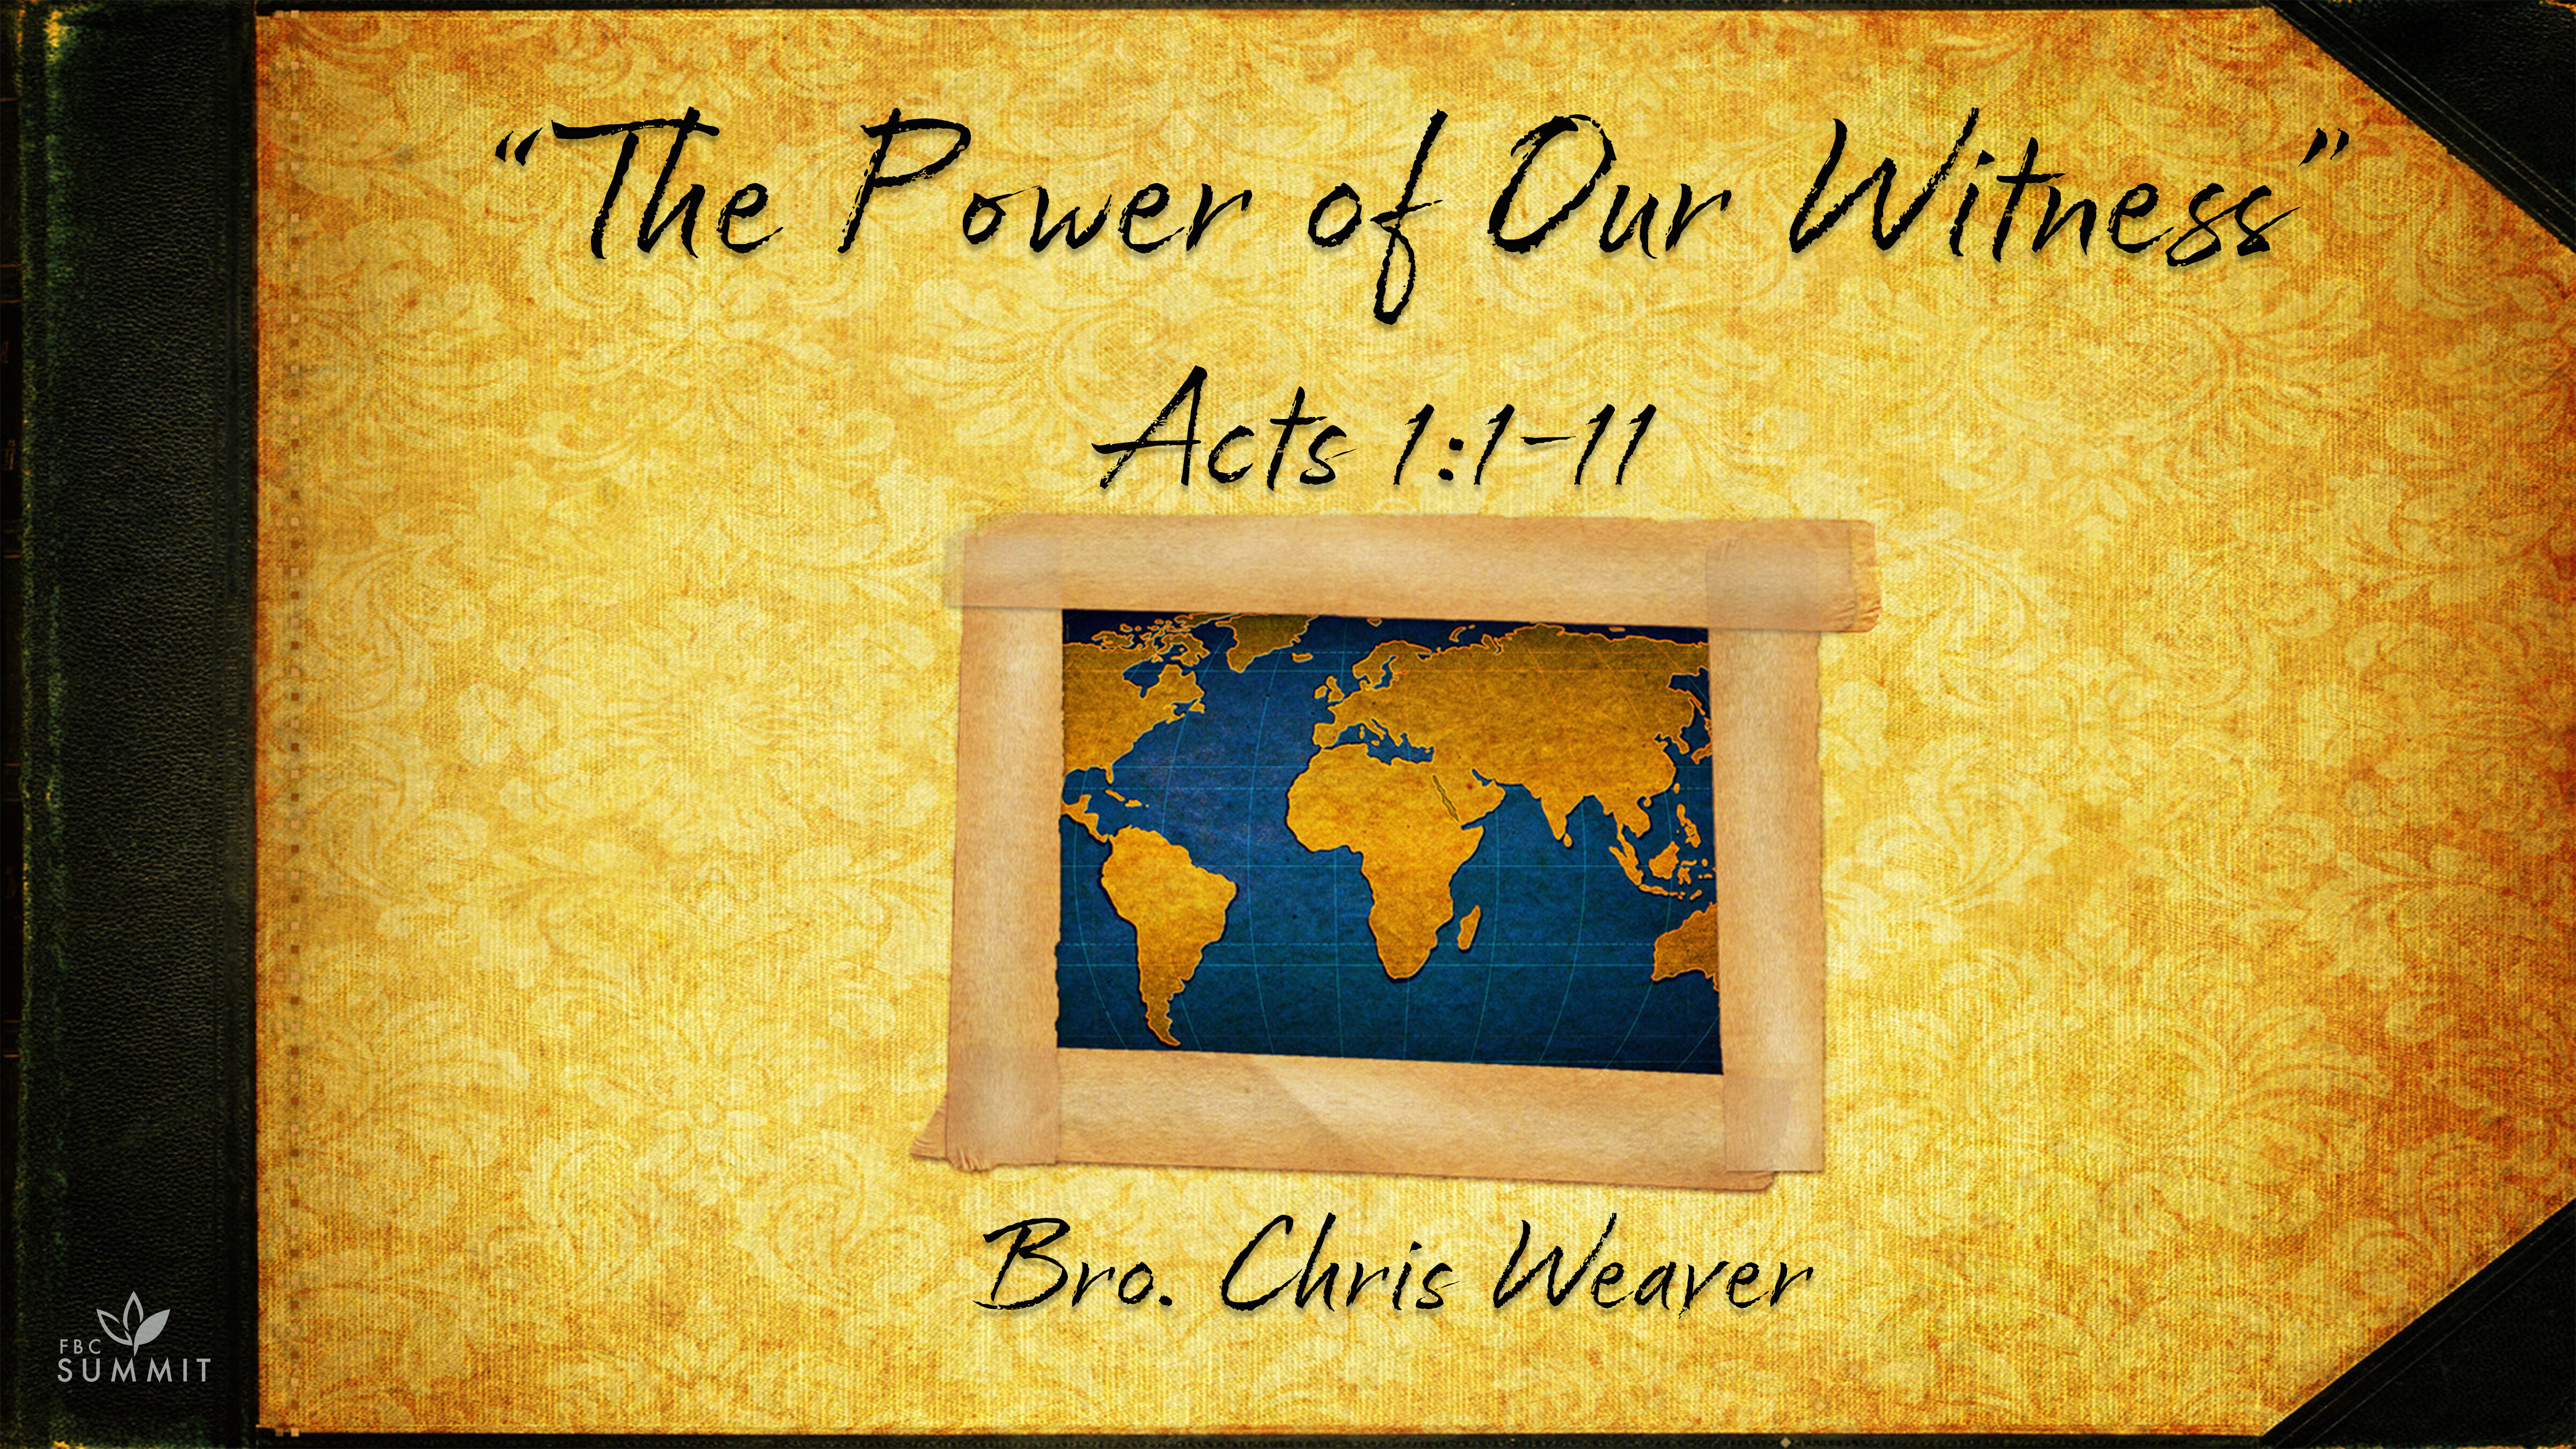 "The Power of Our Witness" Acts 1:1-11 // Chris Weaver, Missions Pastor